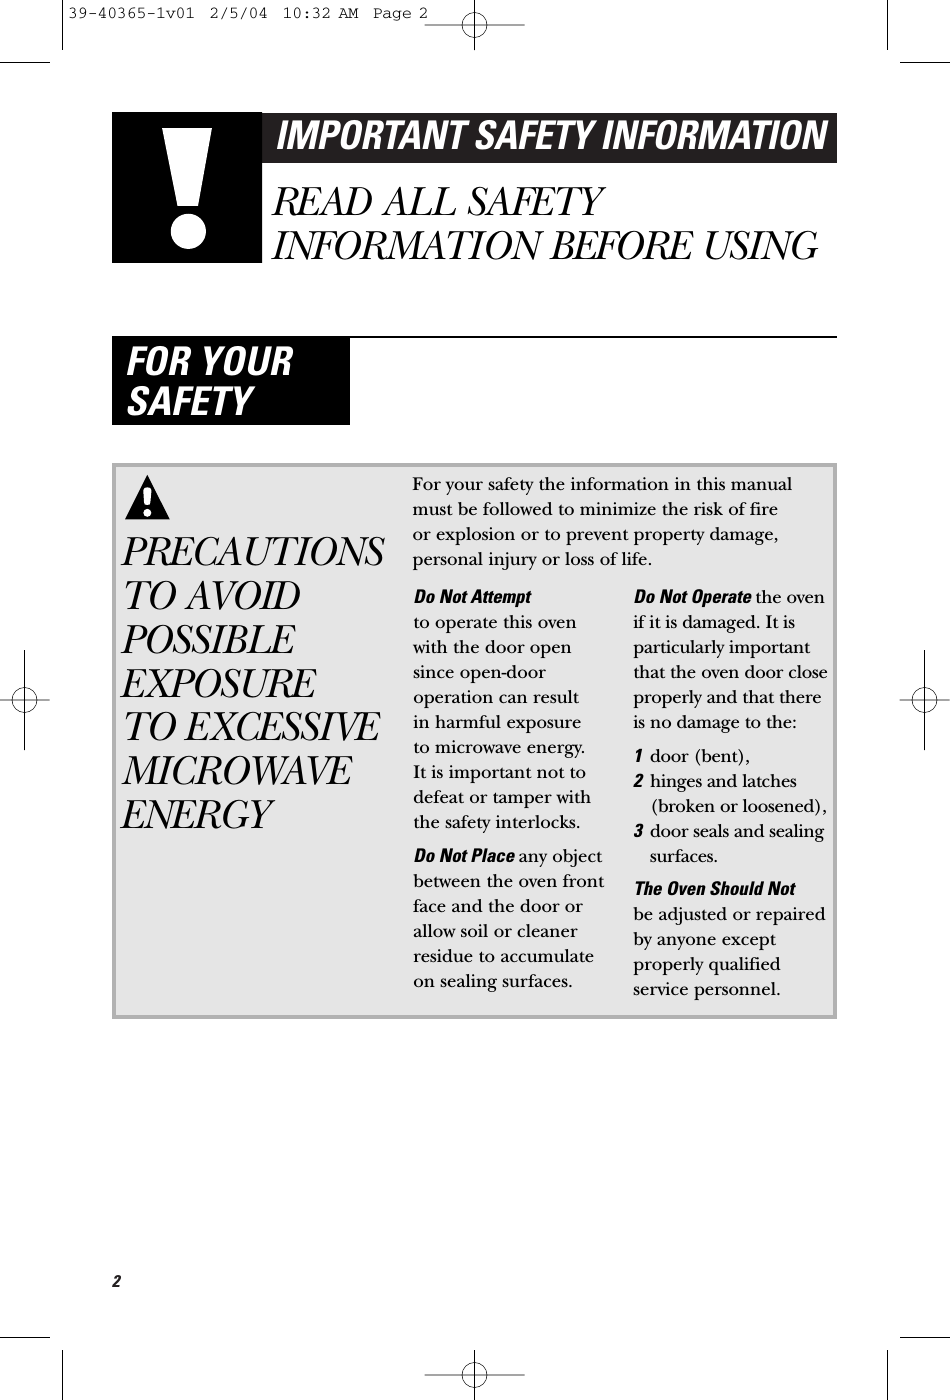 2IMPORTANT SAFETY INFORMATIONREAD ALL SAFETYINFORMATION BEFORE USINGFOR YOURSAFETYPRECAUTIONSTO AVOIDPOSSIBLEEXPOSURE TO EXCESSIVEMICROWAVEENERGYFor your safety the information in this manualmust be followed to minimize the risk of fire or explosion or to prevent property damage,personal injury or loss of life.Do Not Attempt to operate this ovenwith the door opensince open-dooroperation can result in harmful exposure to microwave energy. It is important not todefeat or tamper withthe safety interlocks.Do Not Place any objectbetween the oven frontface and the door orallow soil or cleanerresidue to accumulateon sealing surfaces.Do Not Operate the oven if it is damaged. It isparticularly importantthat the oven door closeproperly and that thereis no damage to the:1door (bent),2hinges and latches(broken or loosened),3door seals and sealingsurfaces.The Oven Should Not be adjusted or repairedby anyone exceptproperly qualifiedservice personnel.39-40365-1v01  2/5/04  10:32 AM  Page 2